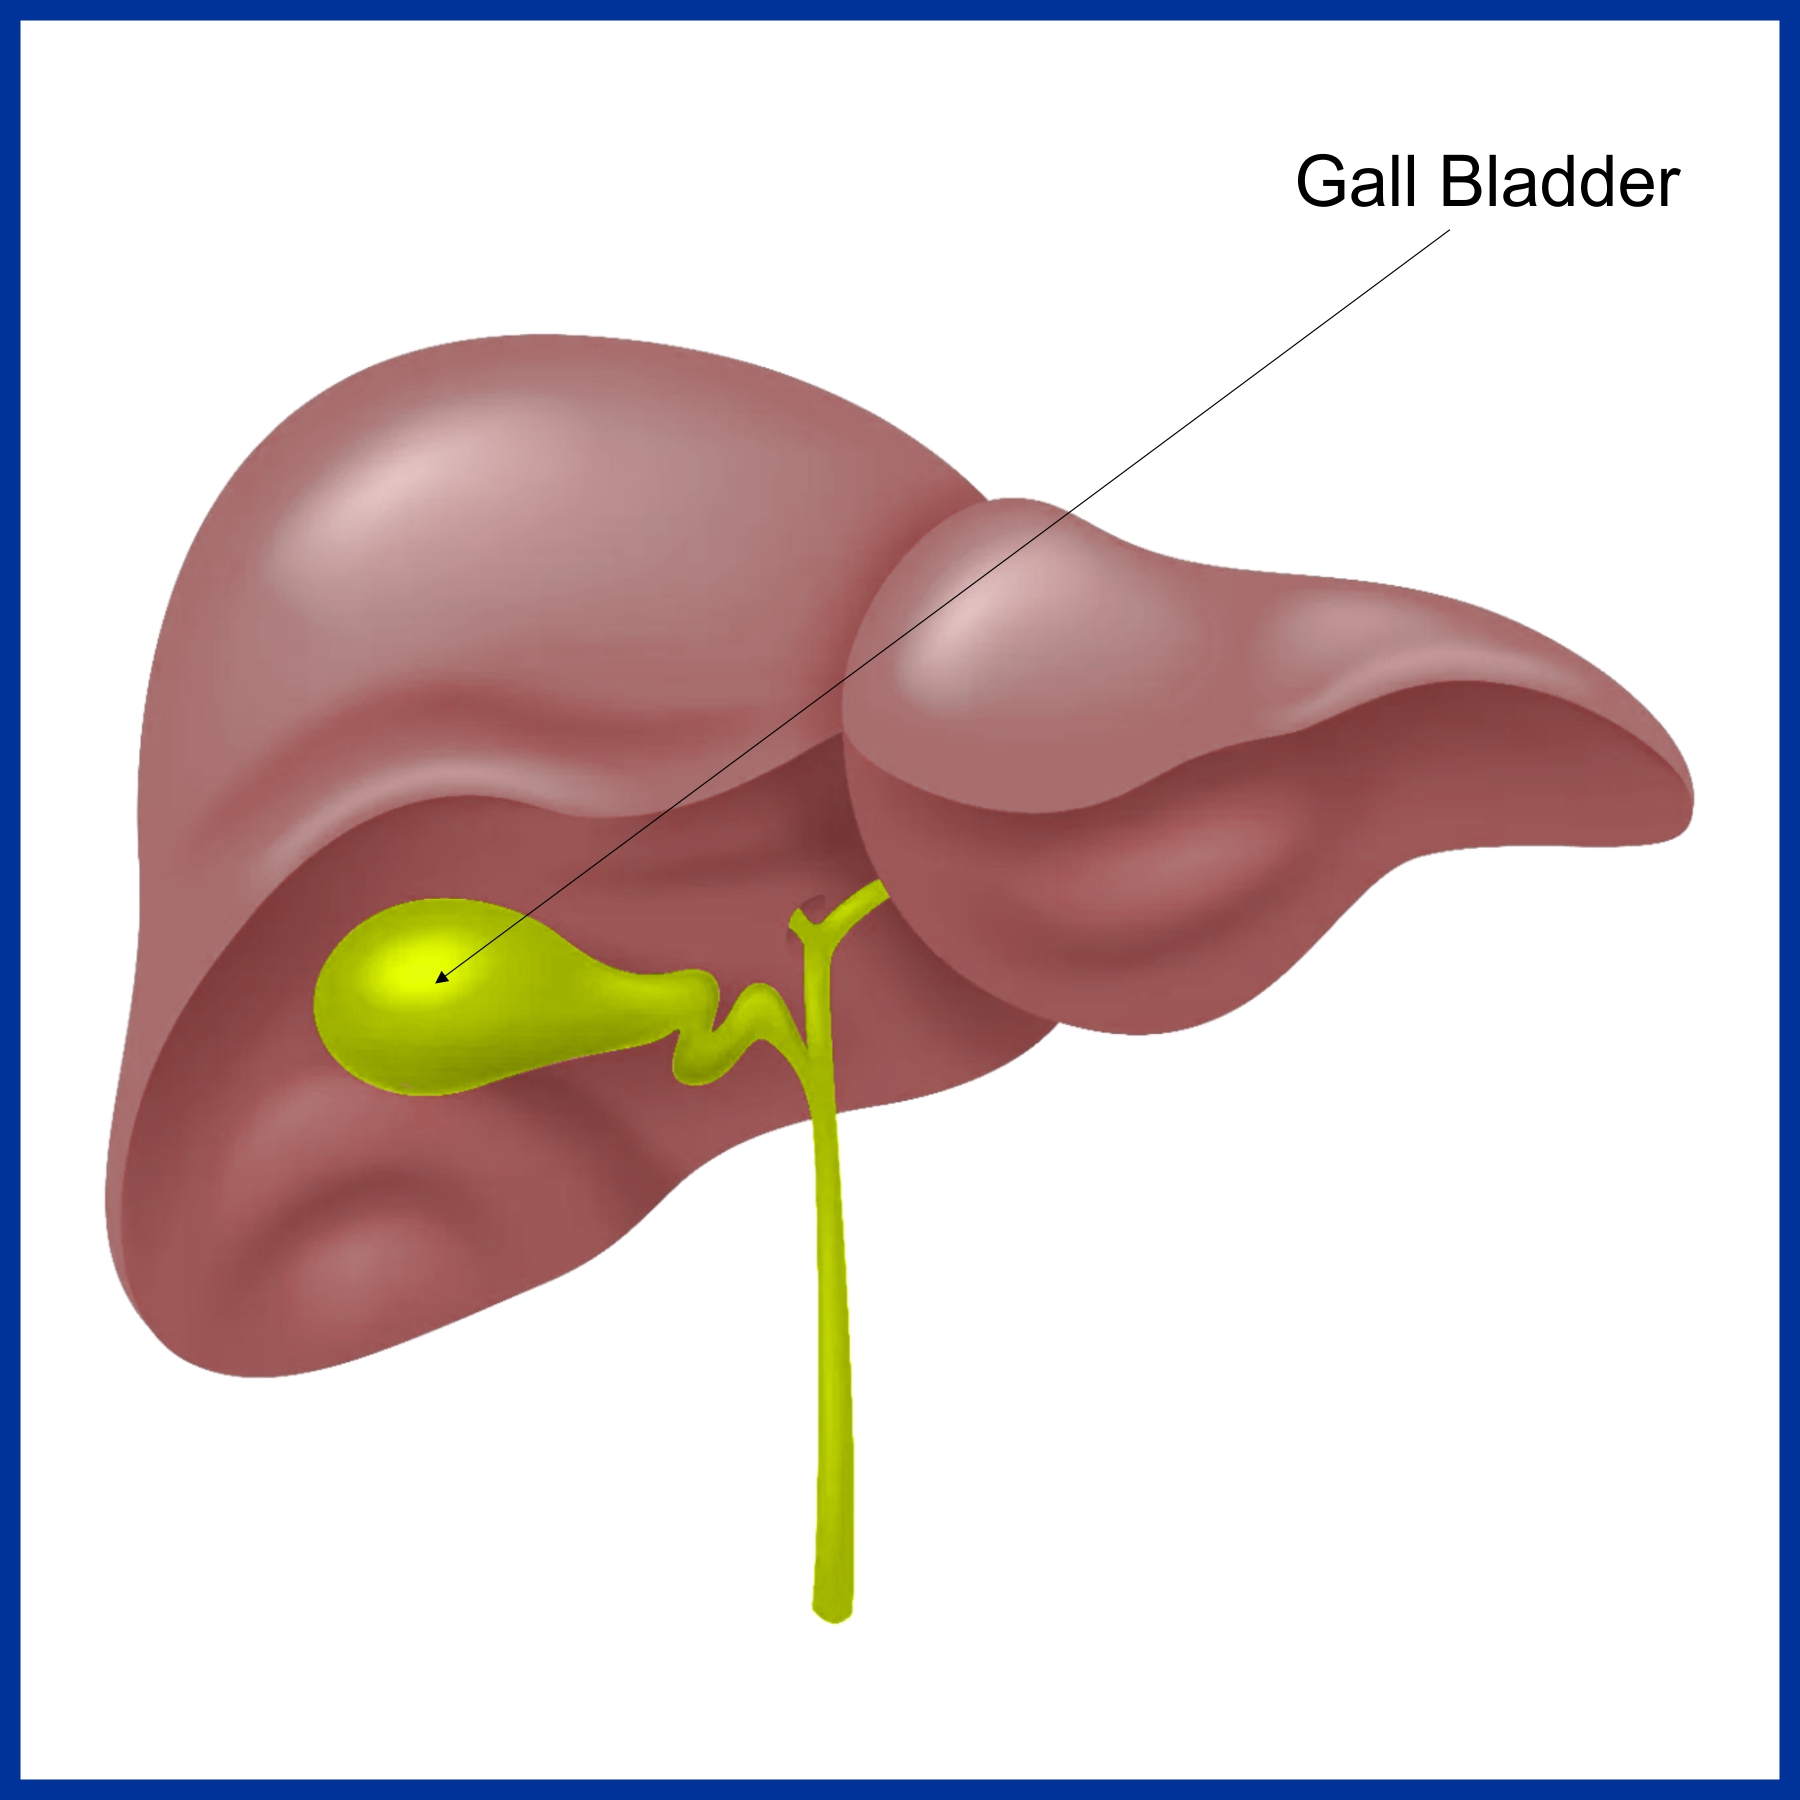 what is a gall bladder for